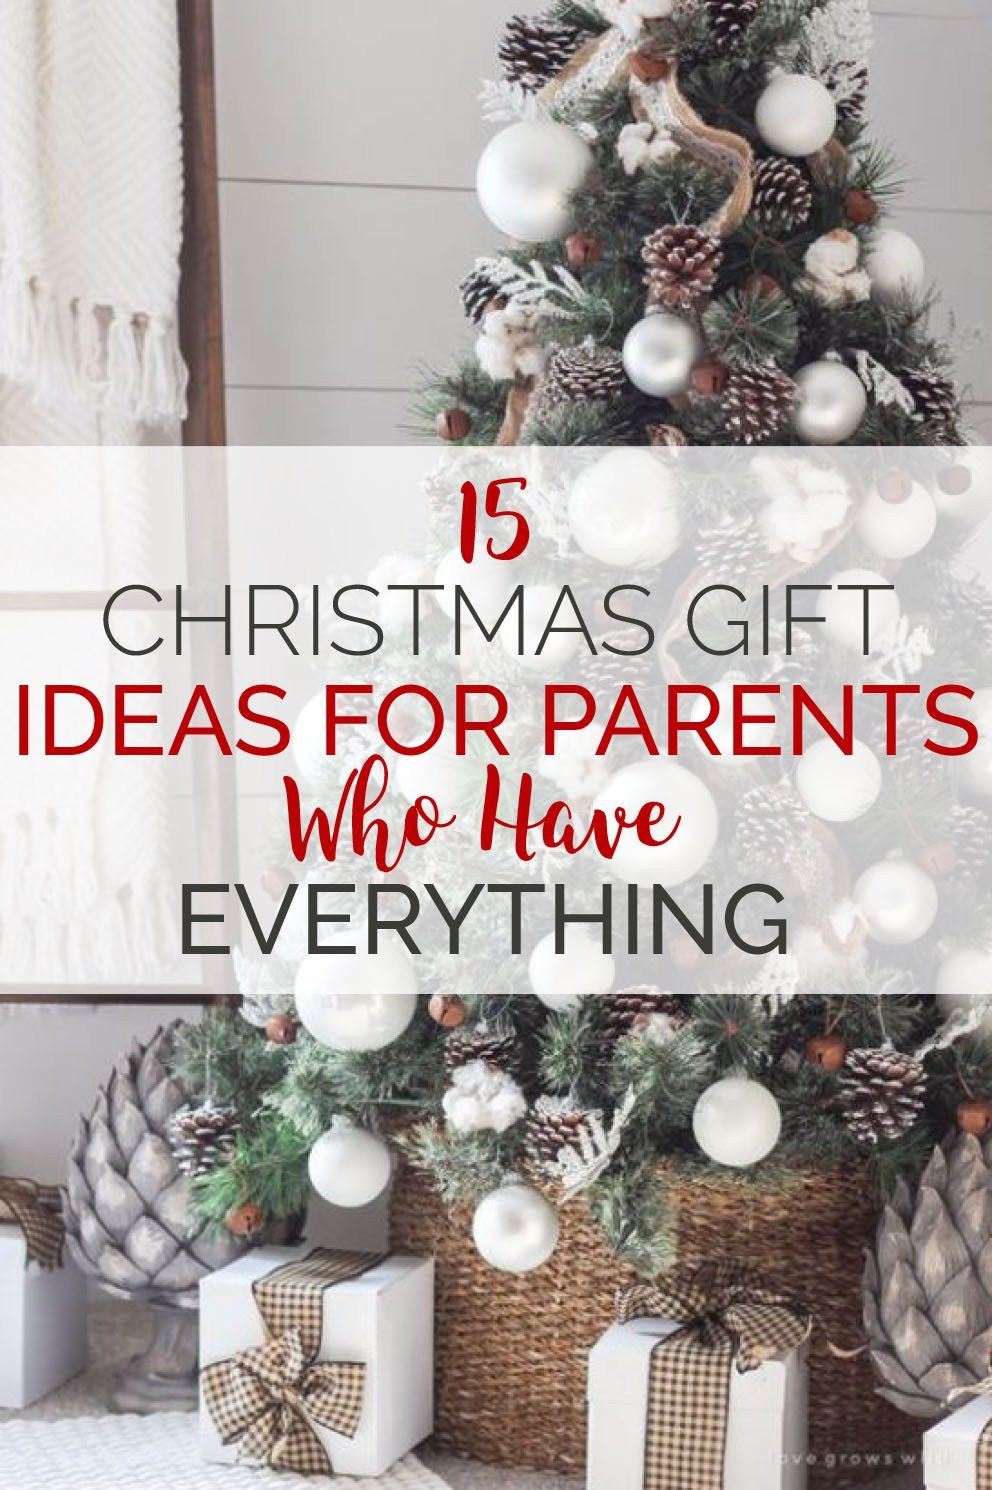 Christmas Gift Ideas For Girlfriends Parents
 15 Christmas Gift Ideas For Parents Who Have Everything